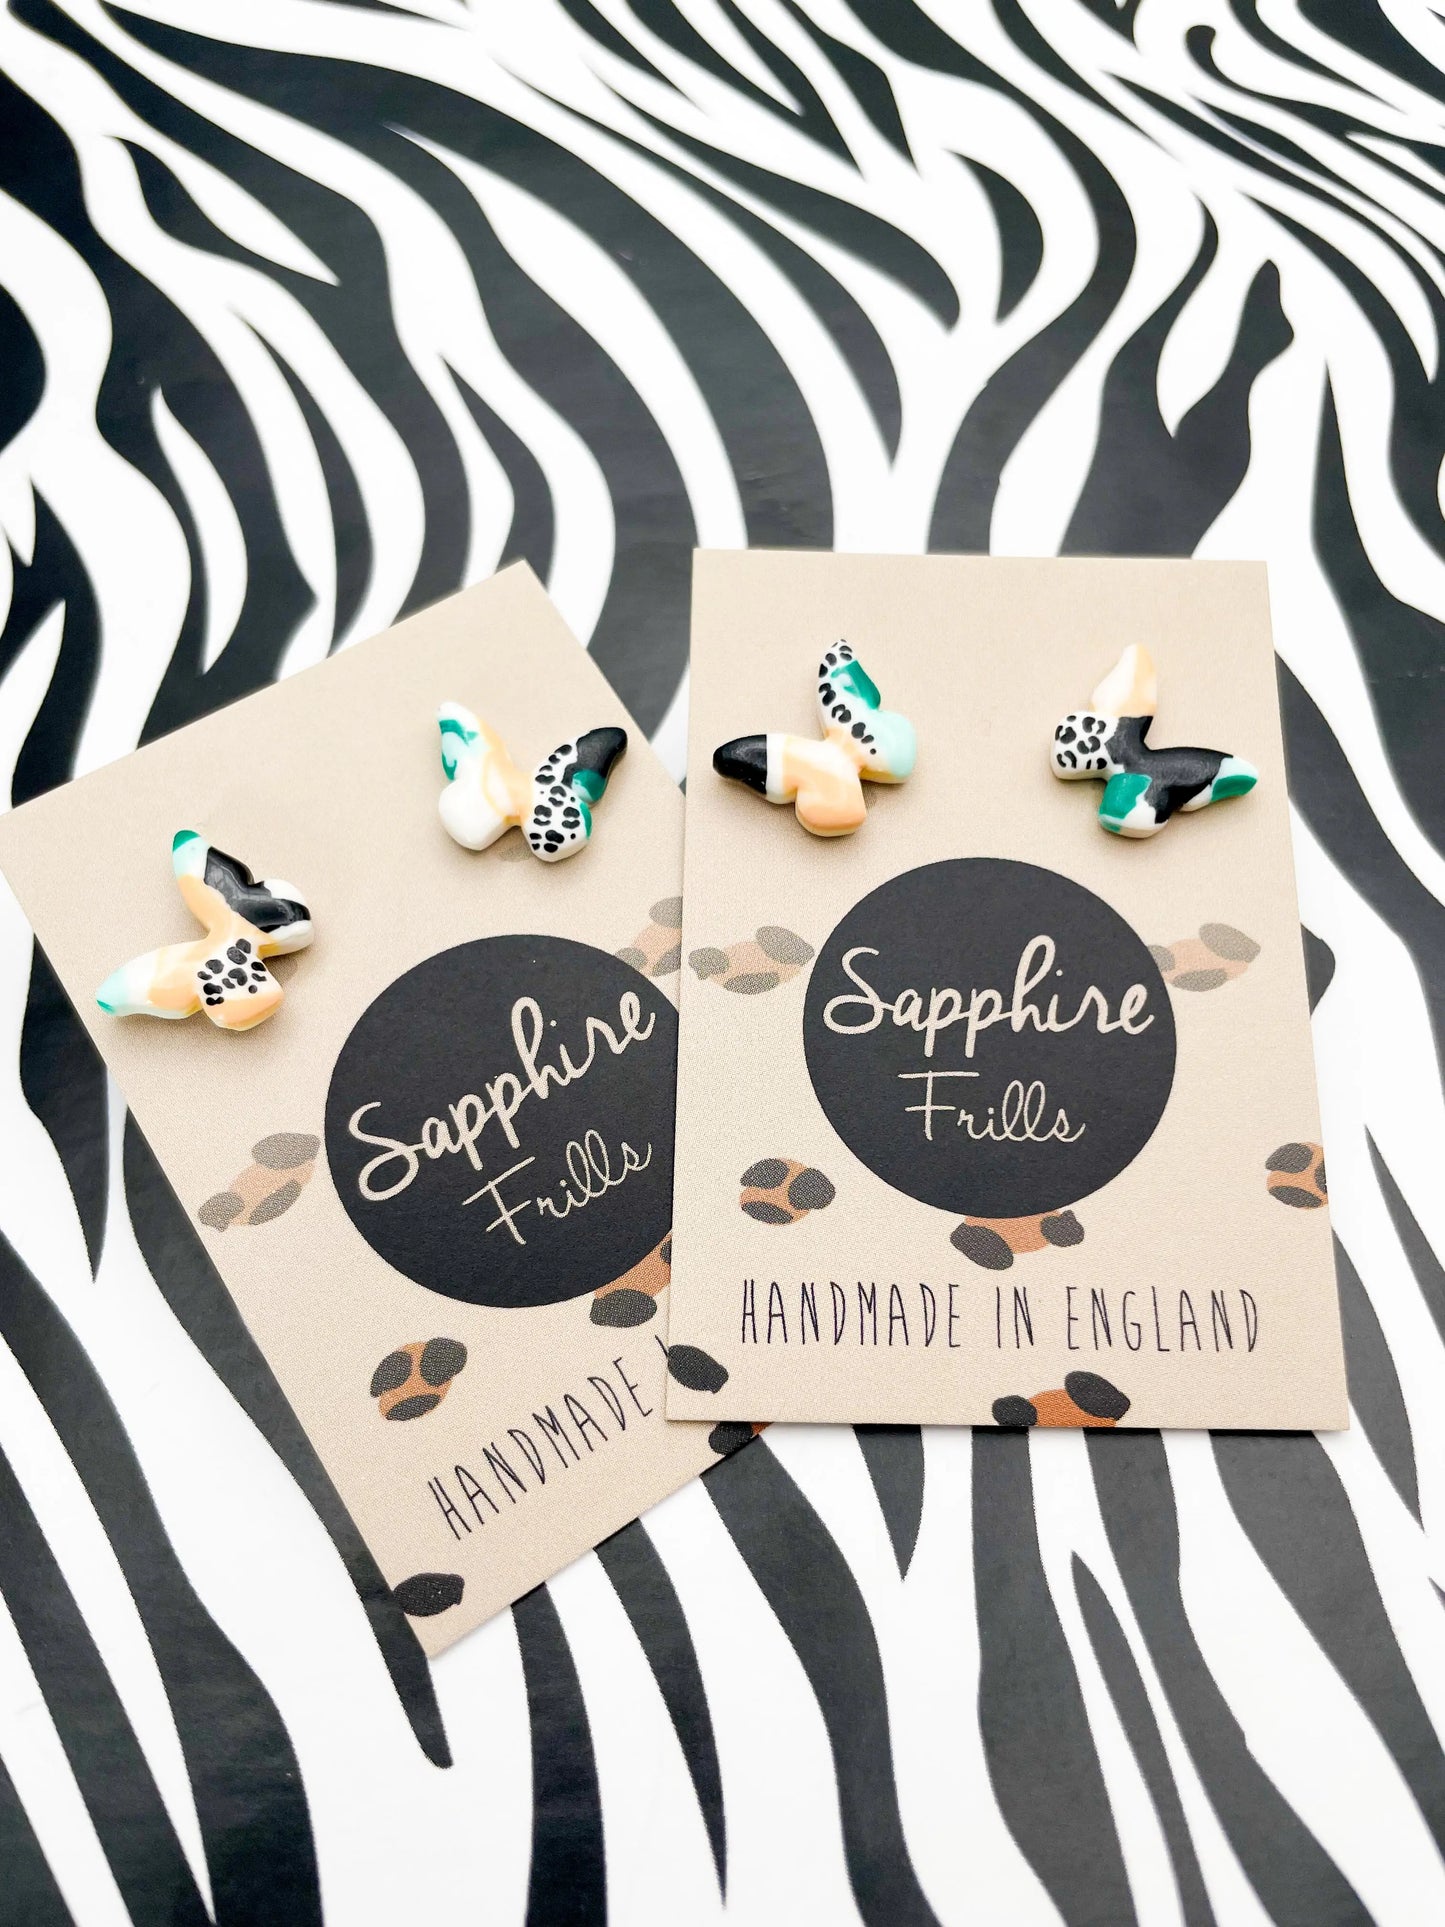 Mini Green and Peach Abstract Leopard Print Butterfly Stud Earrings from Sapphire Frills